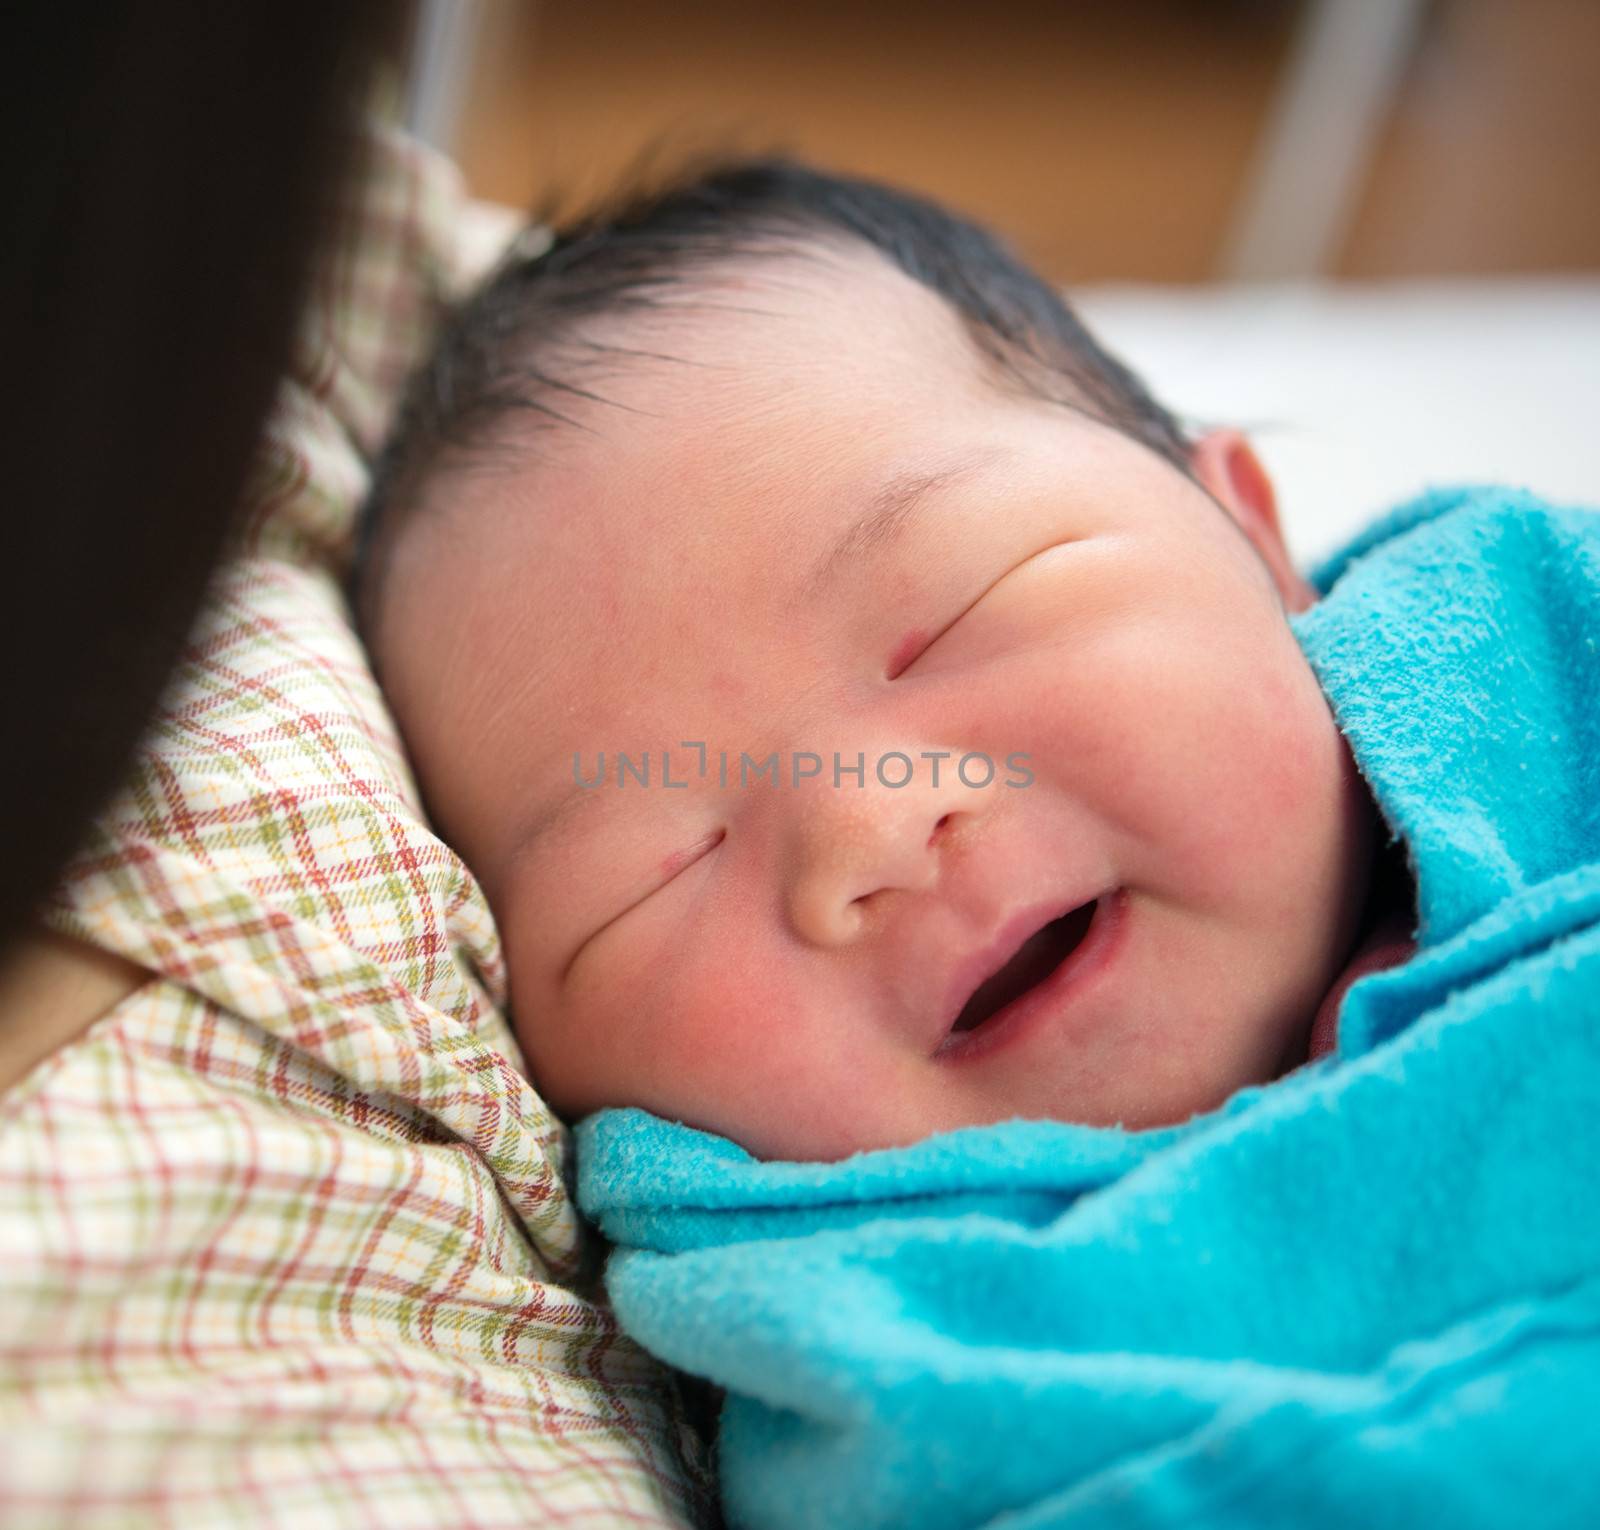 Newborn Asian baby girl smiling and fall asleep in mother's arms, inside hospital room